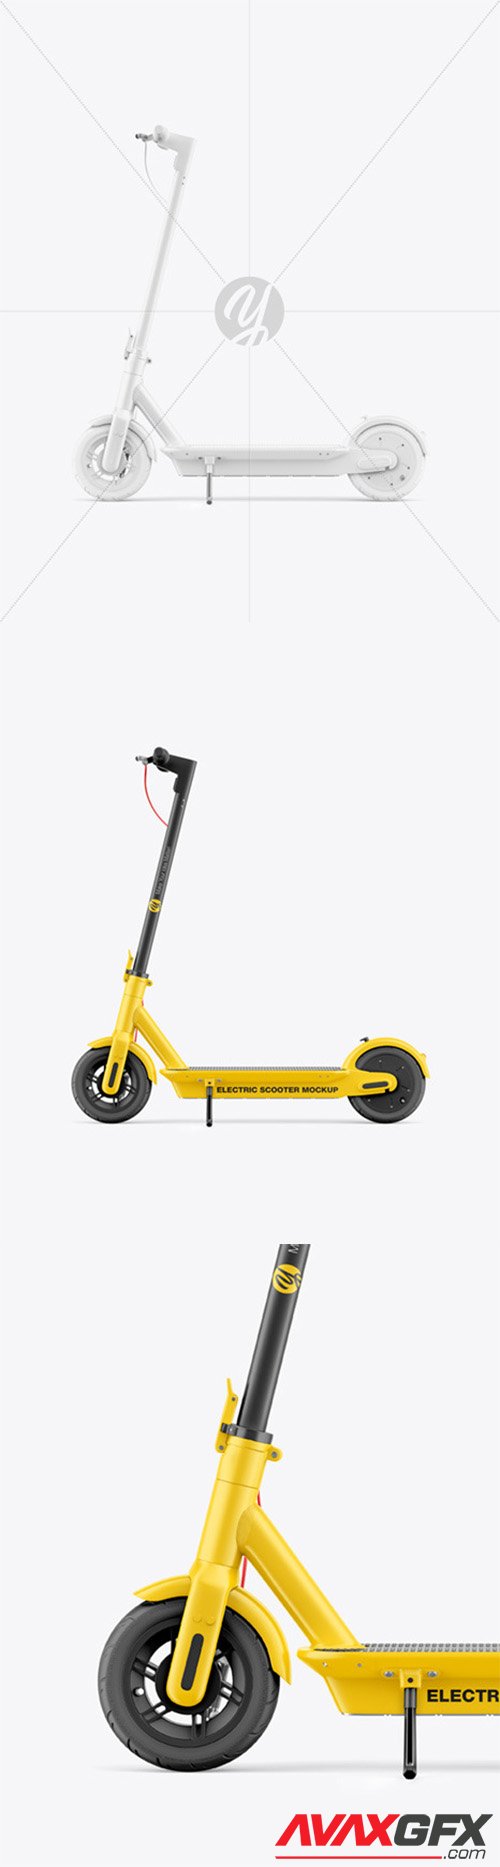 Electric Scooter Mockup - Side View 86115 TIF